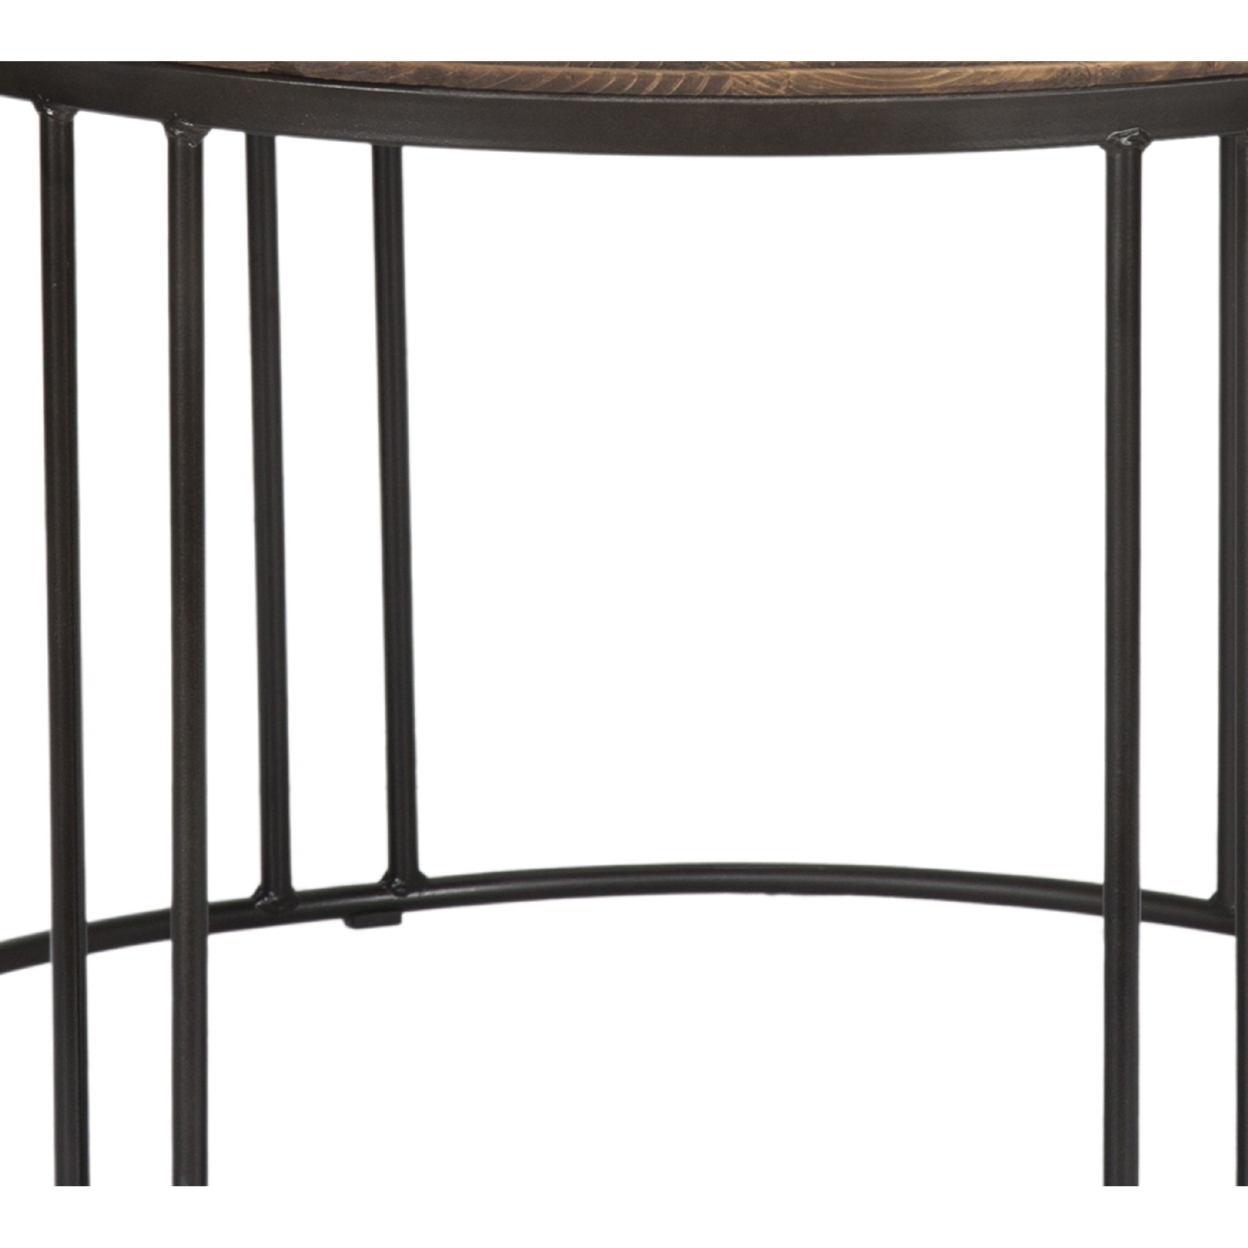 Iron Framed Round Coffee Table With Wooden Top, Brown And Black- Saltoro Sherpi